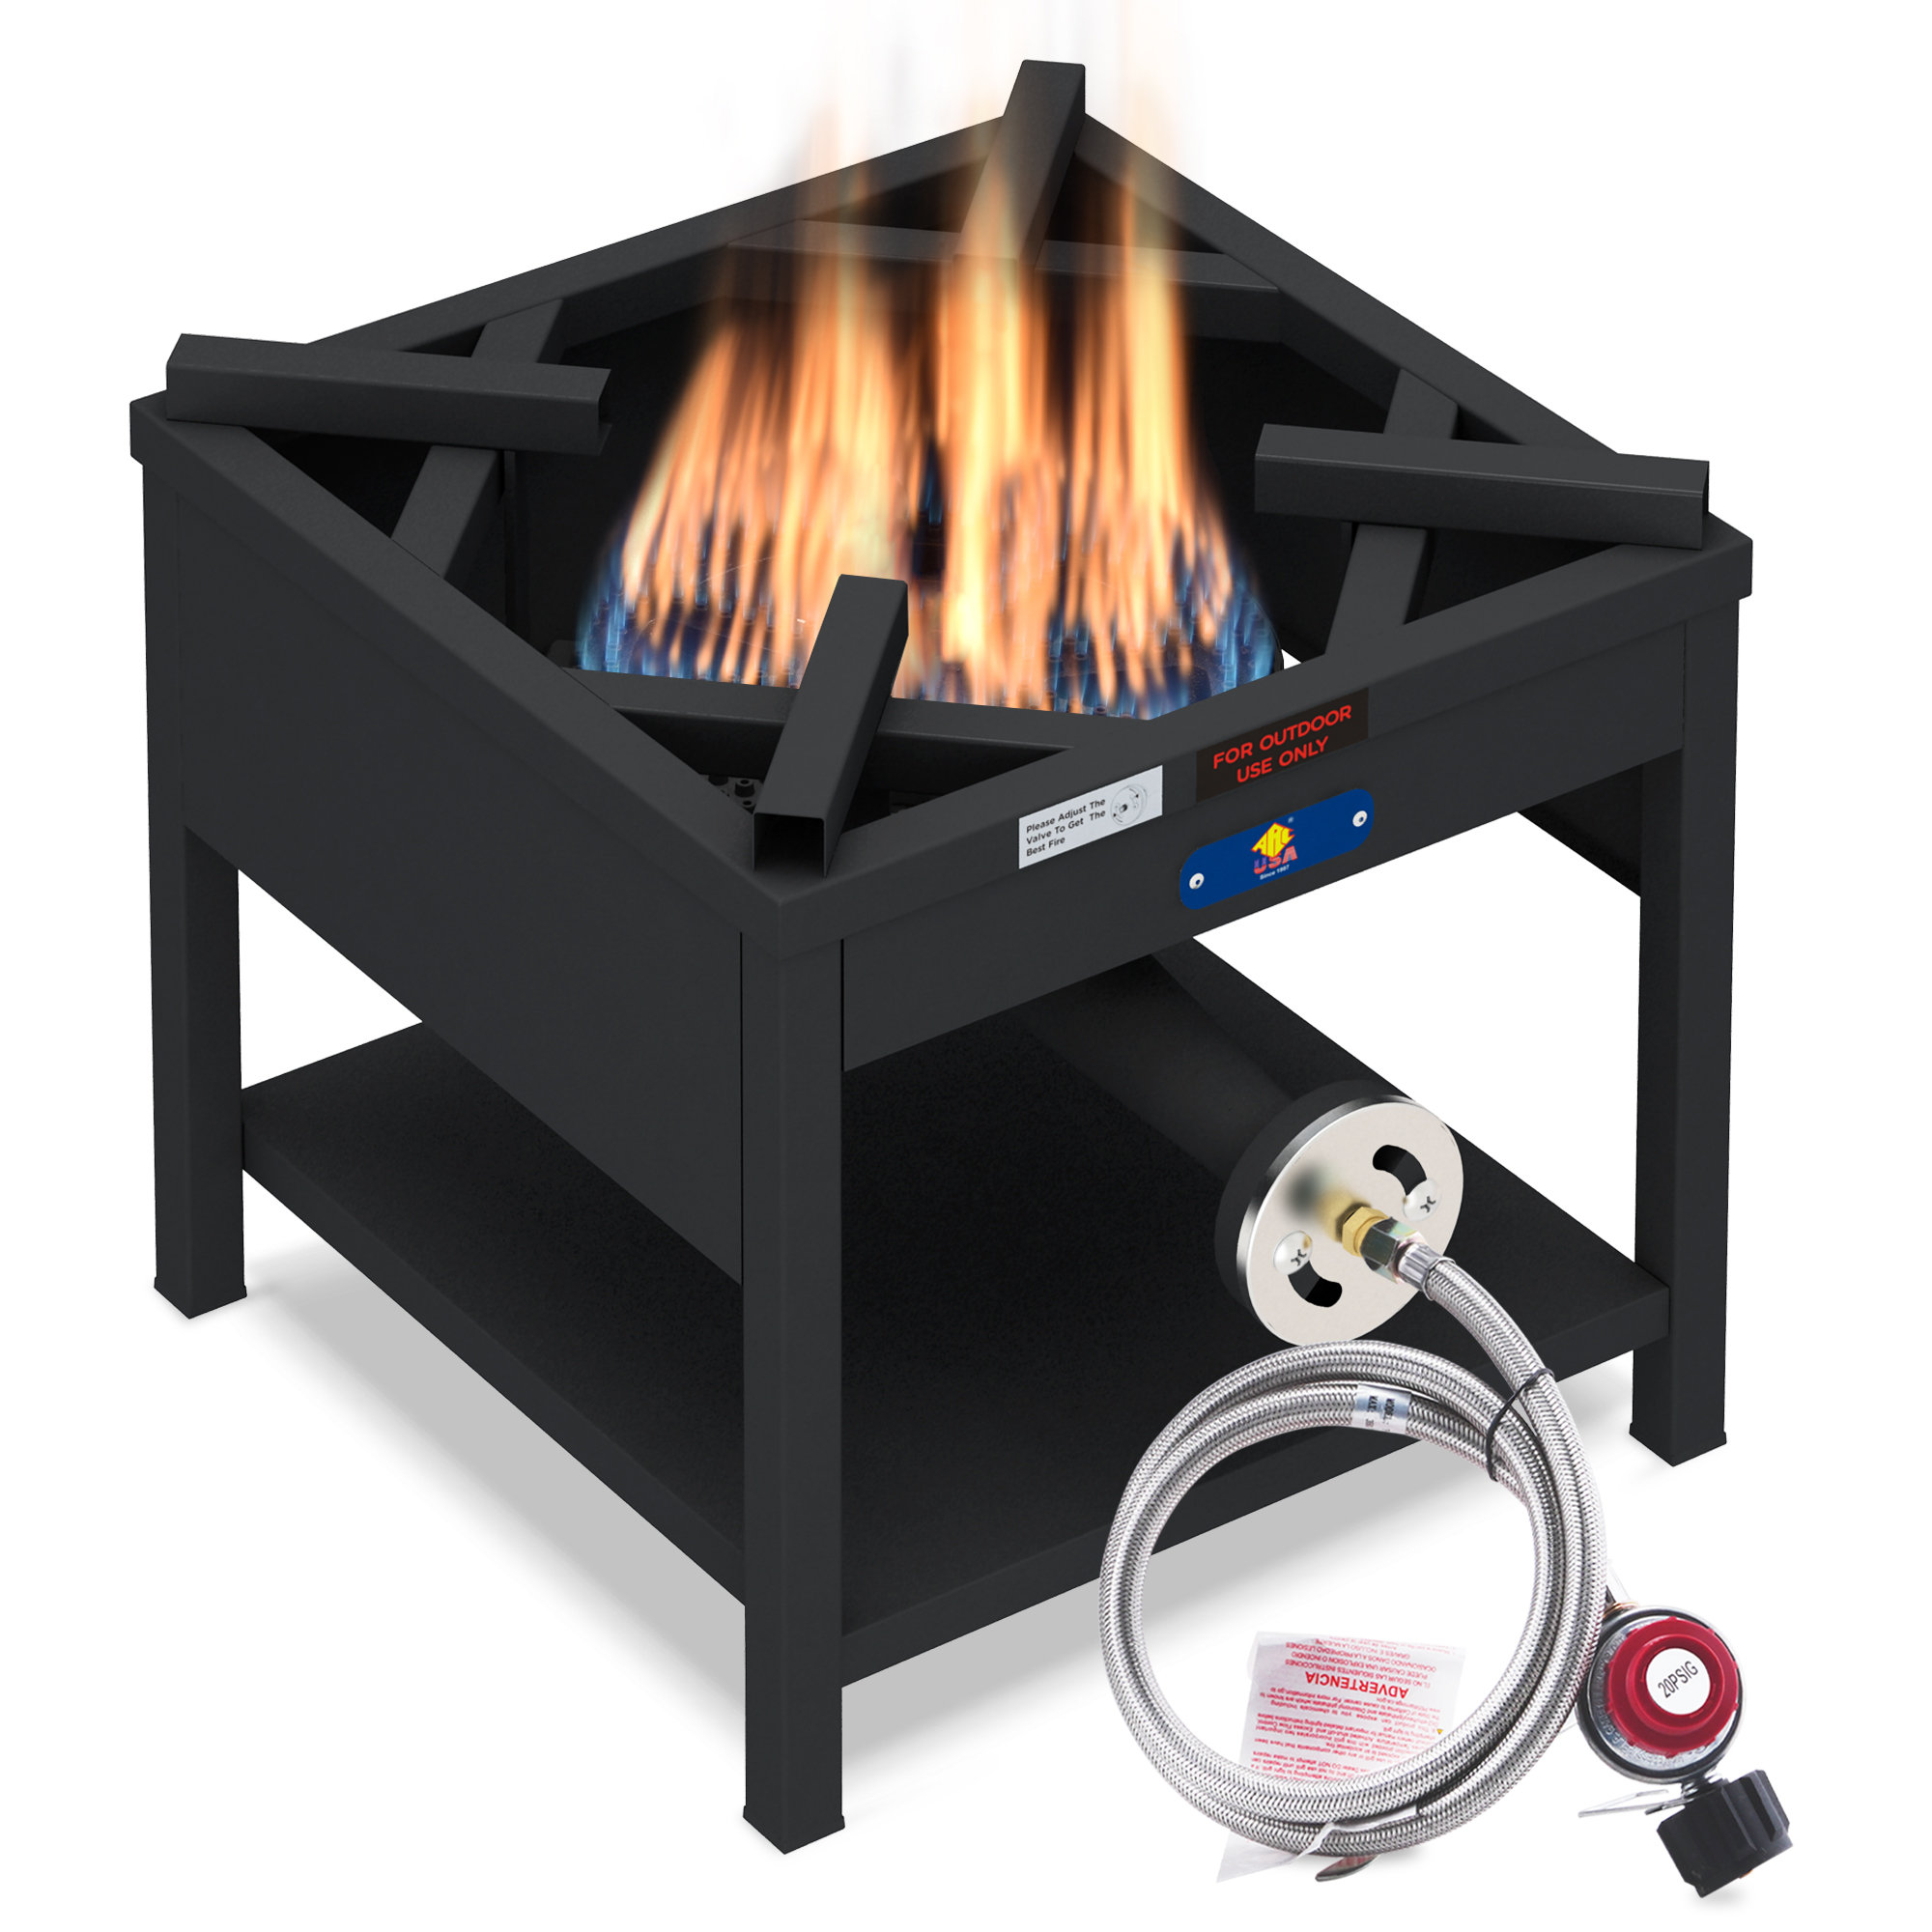 Arc 339S Super Propane Burner Stove With Electron Strike, 13 Heavy Duty Cast  Iron Burner, Portable Large Camping Stove With Stainless Steel Hose &  Regulator & Reviews